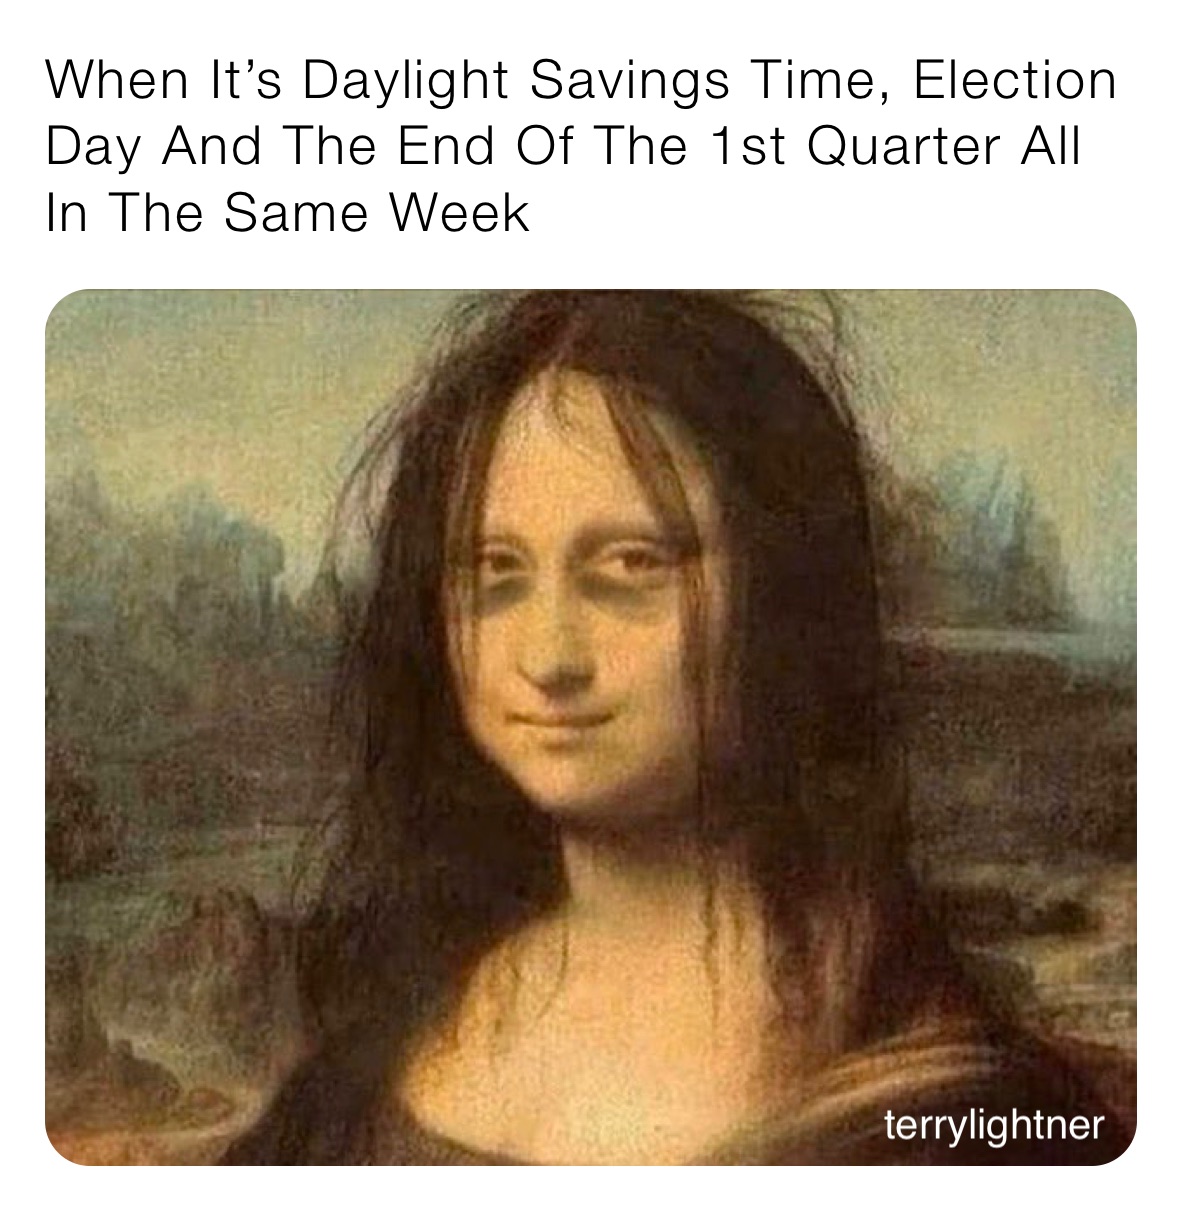 When It’s Daylight Savings Time, Election Day And The End Of The 1st